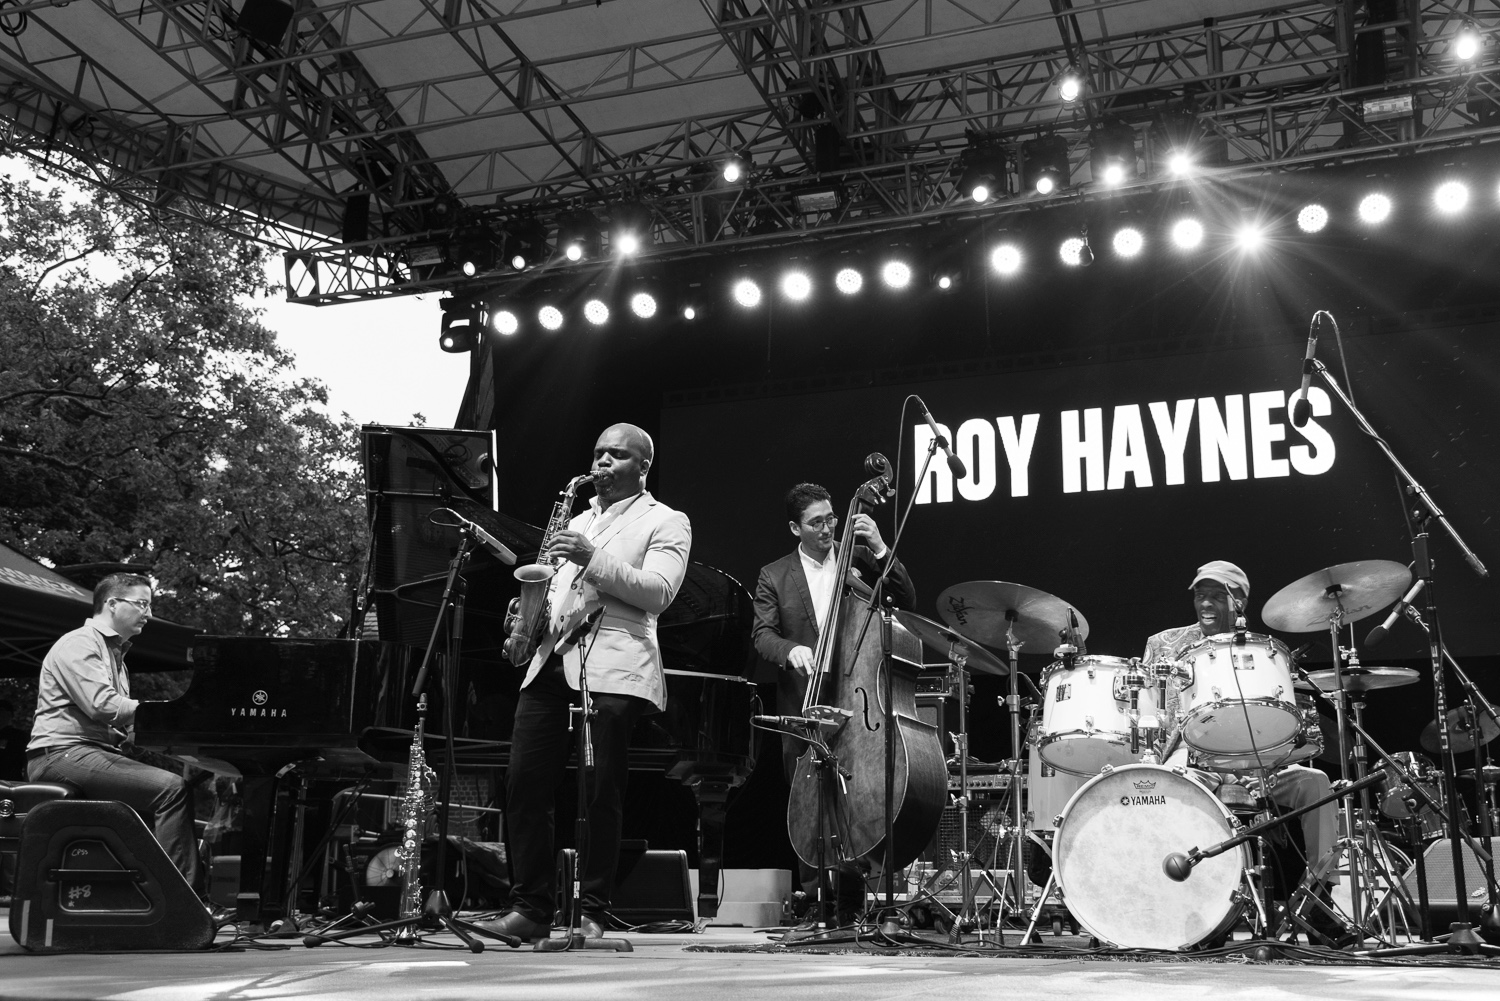 Roy Haynes' Fountain of Youth, 2016